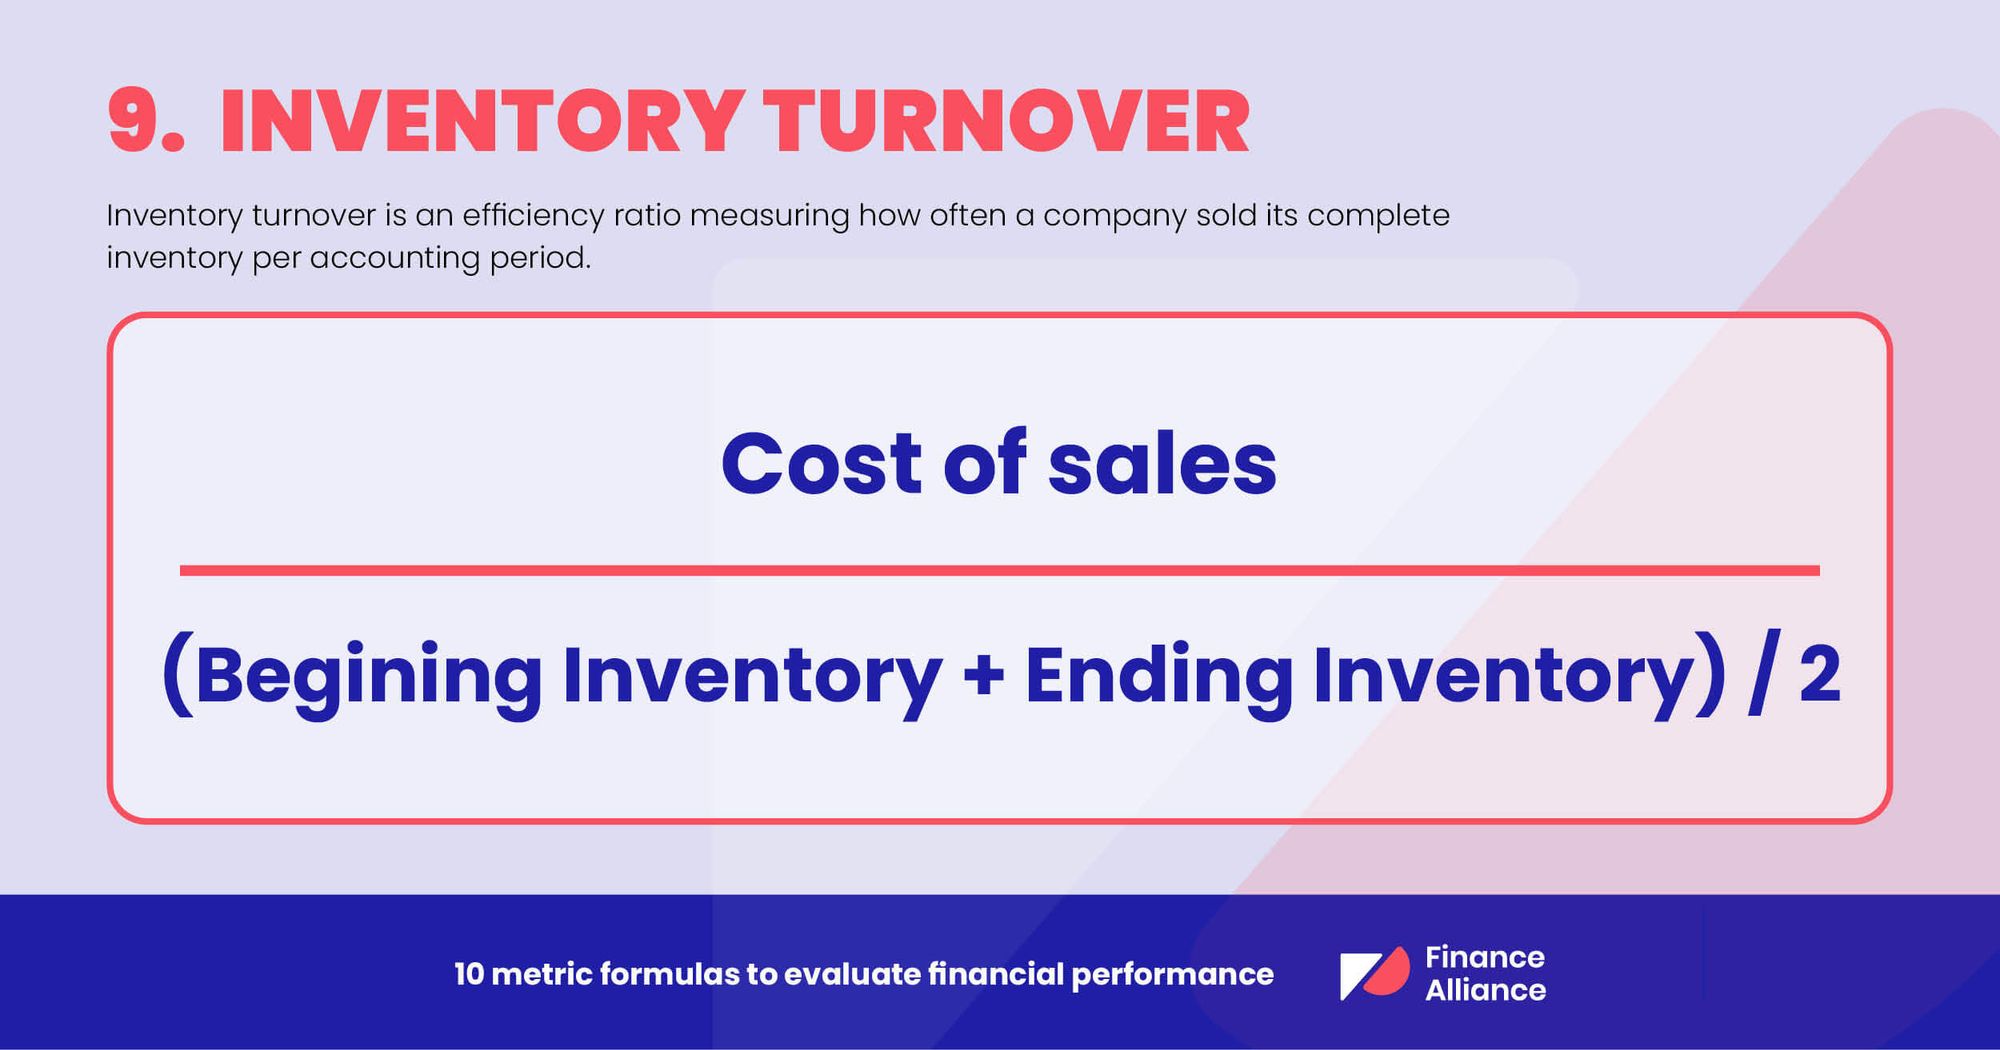 Financial performance analysis metric 9 - Inventory turnover